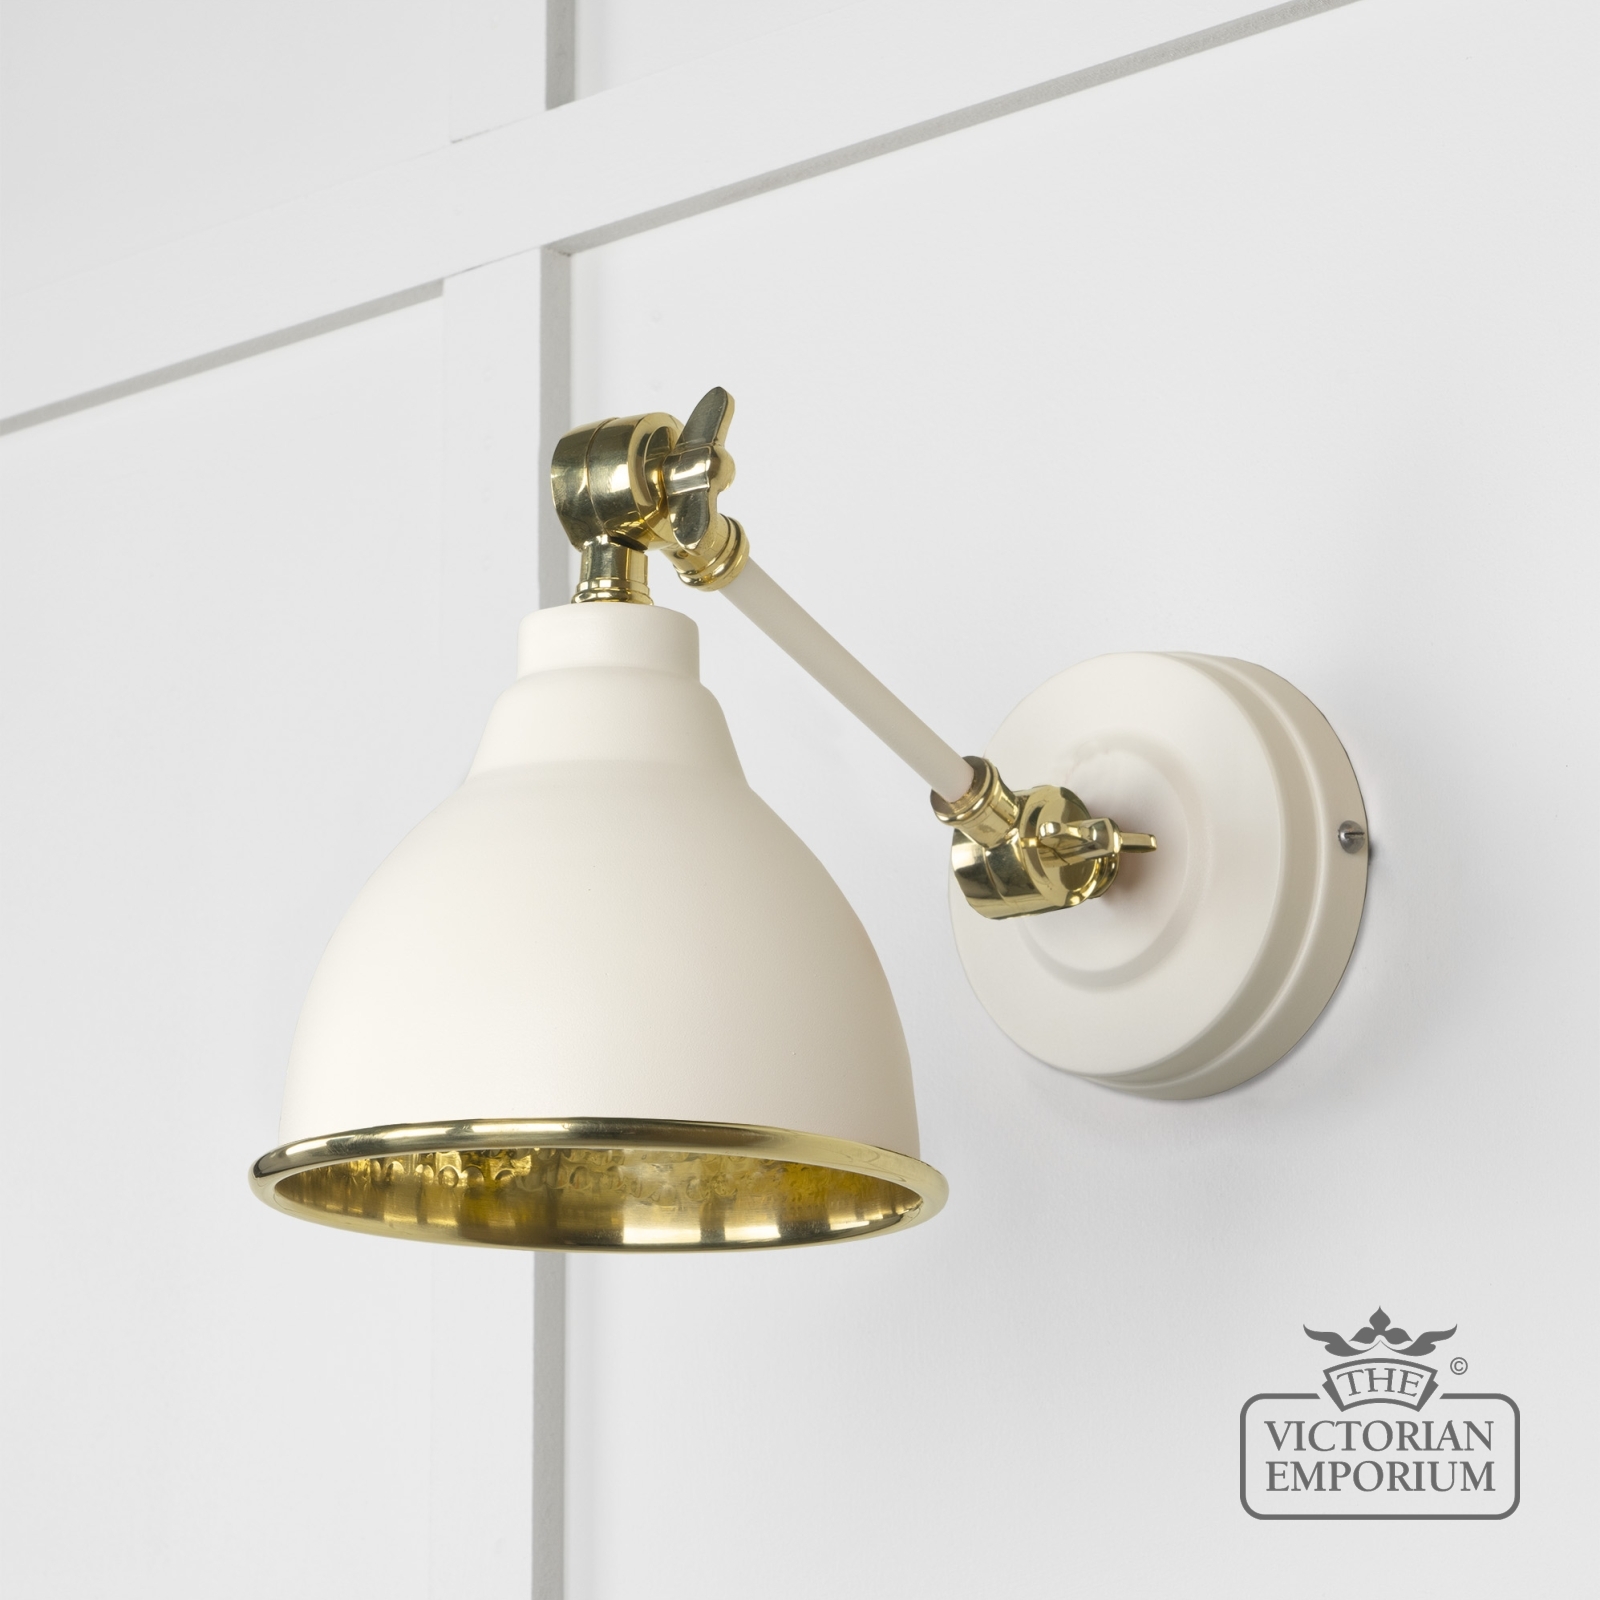 Brindle Wall Light in Hammered Brass with Teasel Exterior